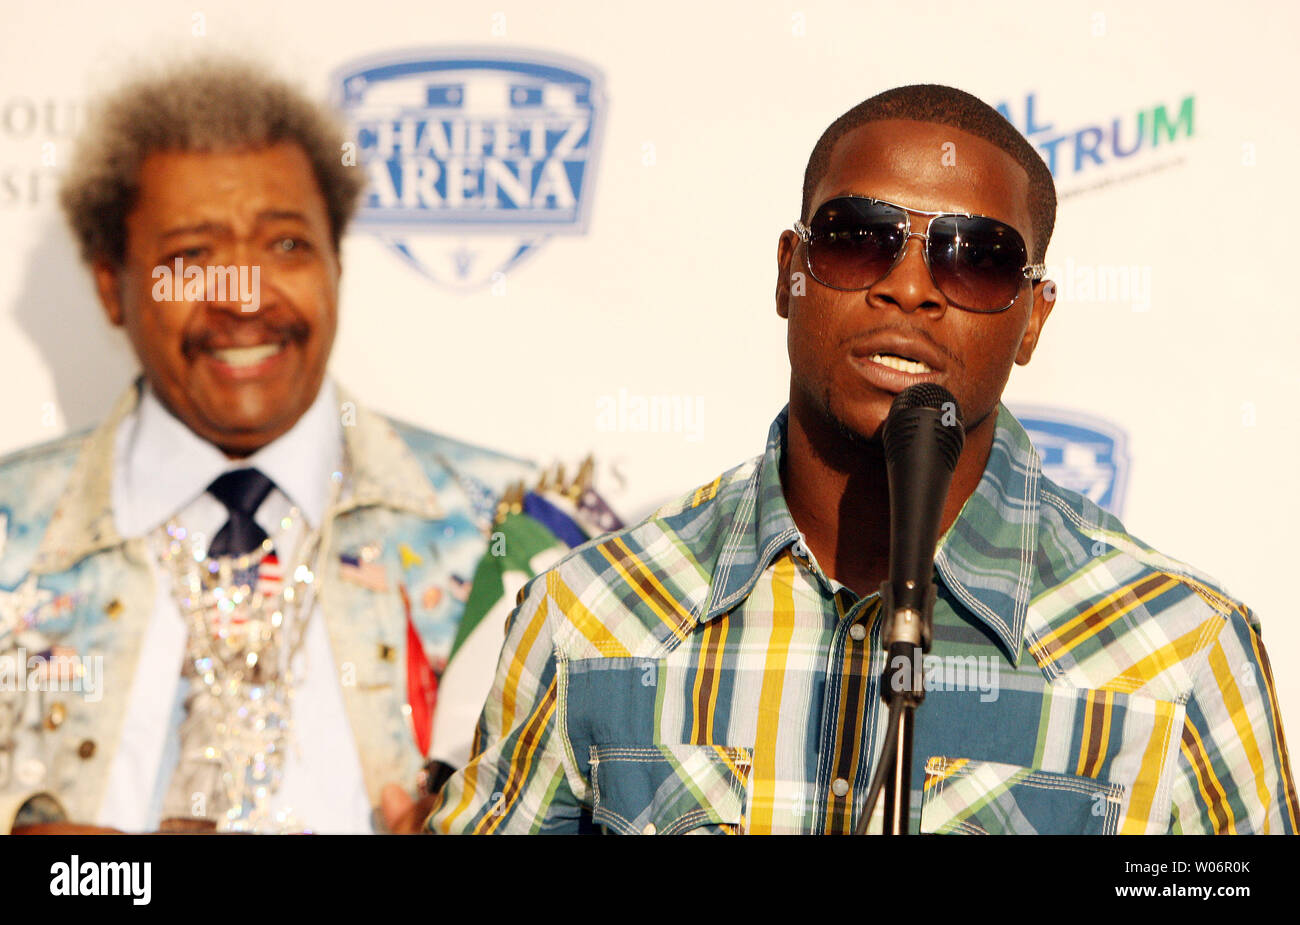 IBF Jr. Middleweight title holder Cory Spinks (R) addresses reporters as promoter Don King looks on during a press conference at the Chaifetz Arena in St. Louis on May 12, 2010. Spinks will defend his title against challenger Cornelius Bundrage on June 12.    UPI/Bill Greenblatt Stock Photo